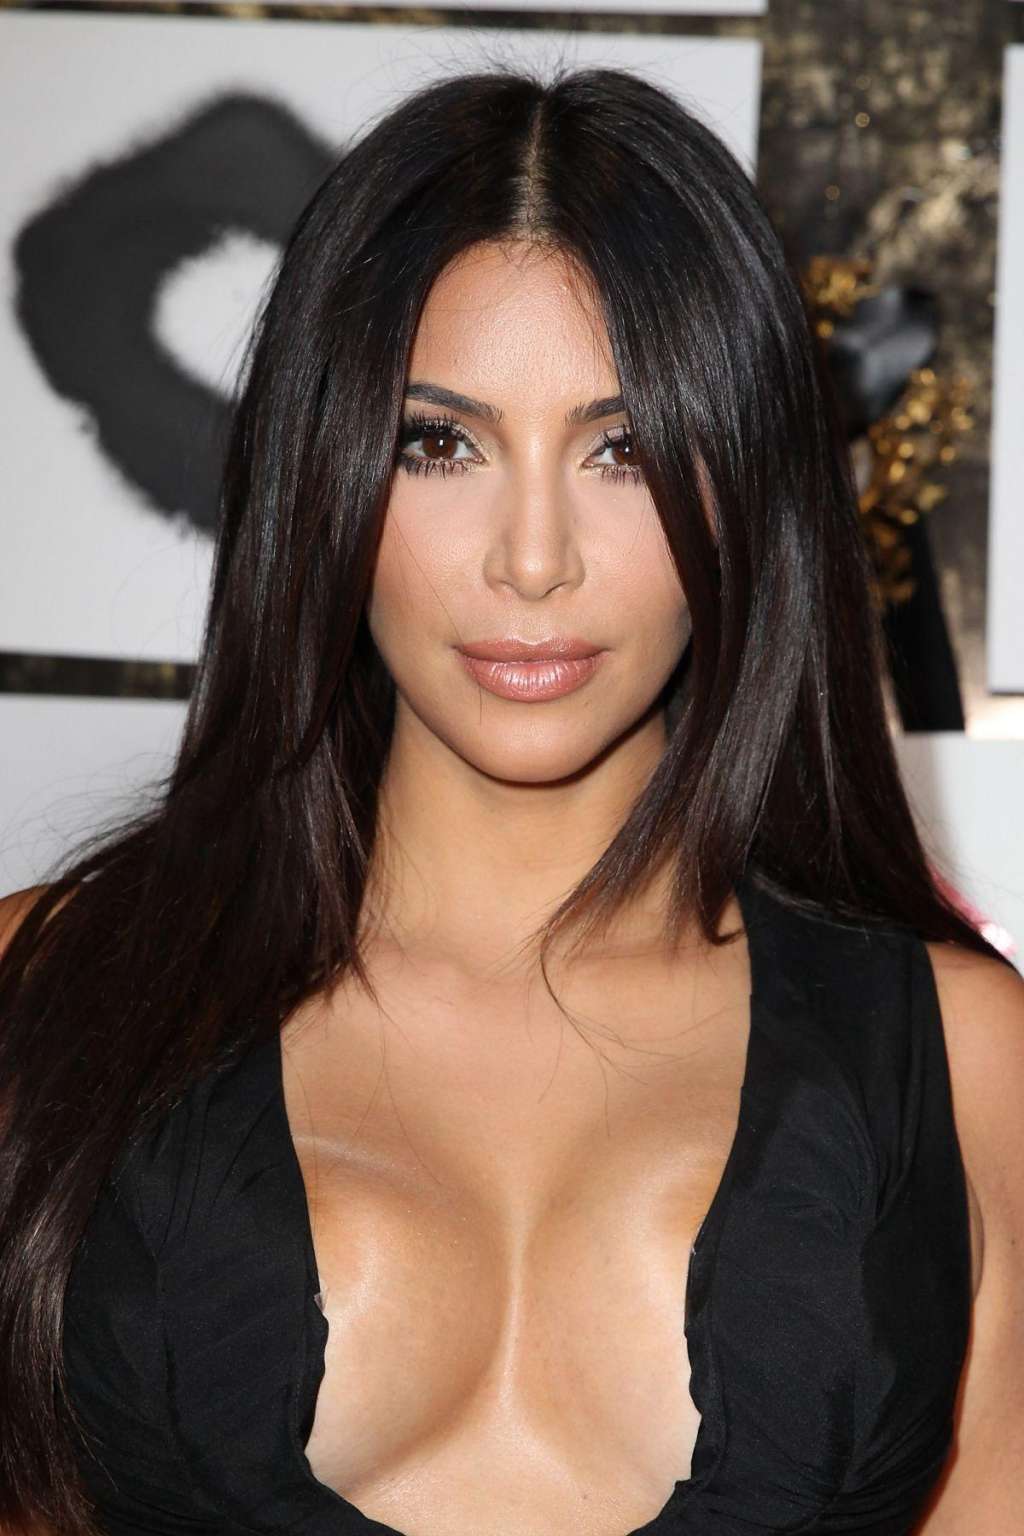 In 2012, Kim Kardashian was assaulted by an animal activist who flour bombed the reality star for her willingness to wear fur.